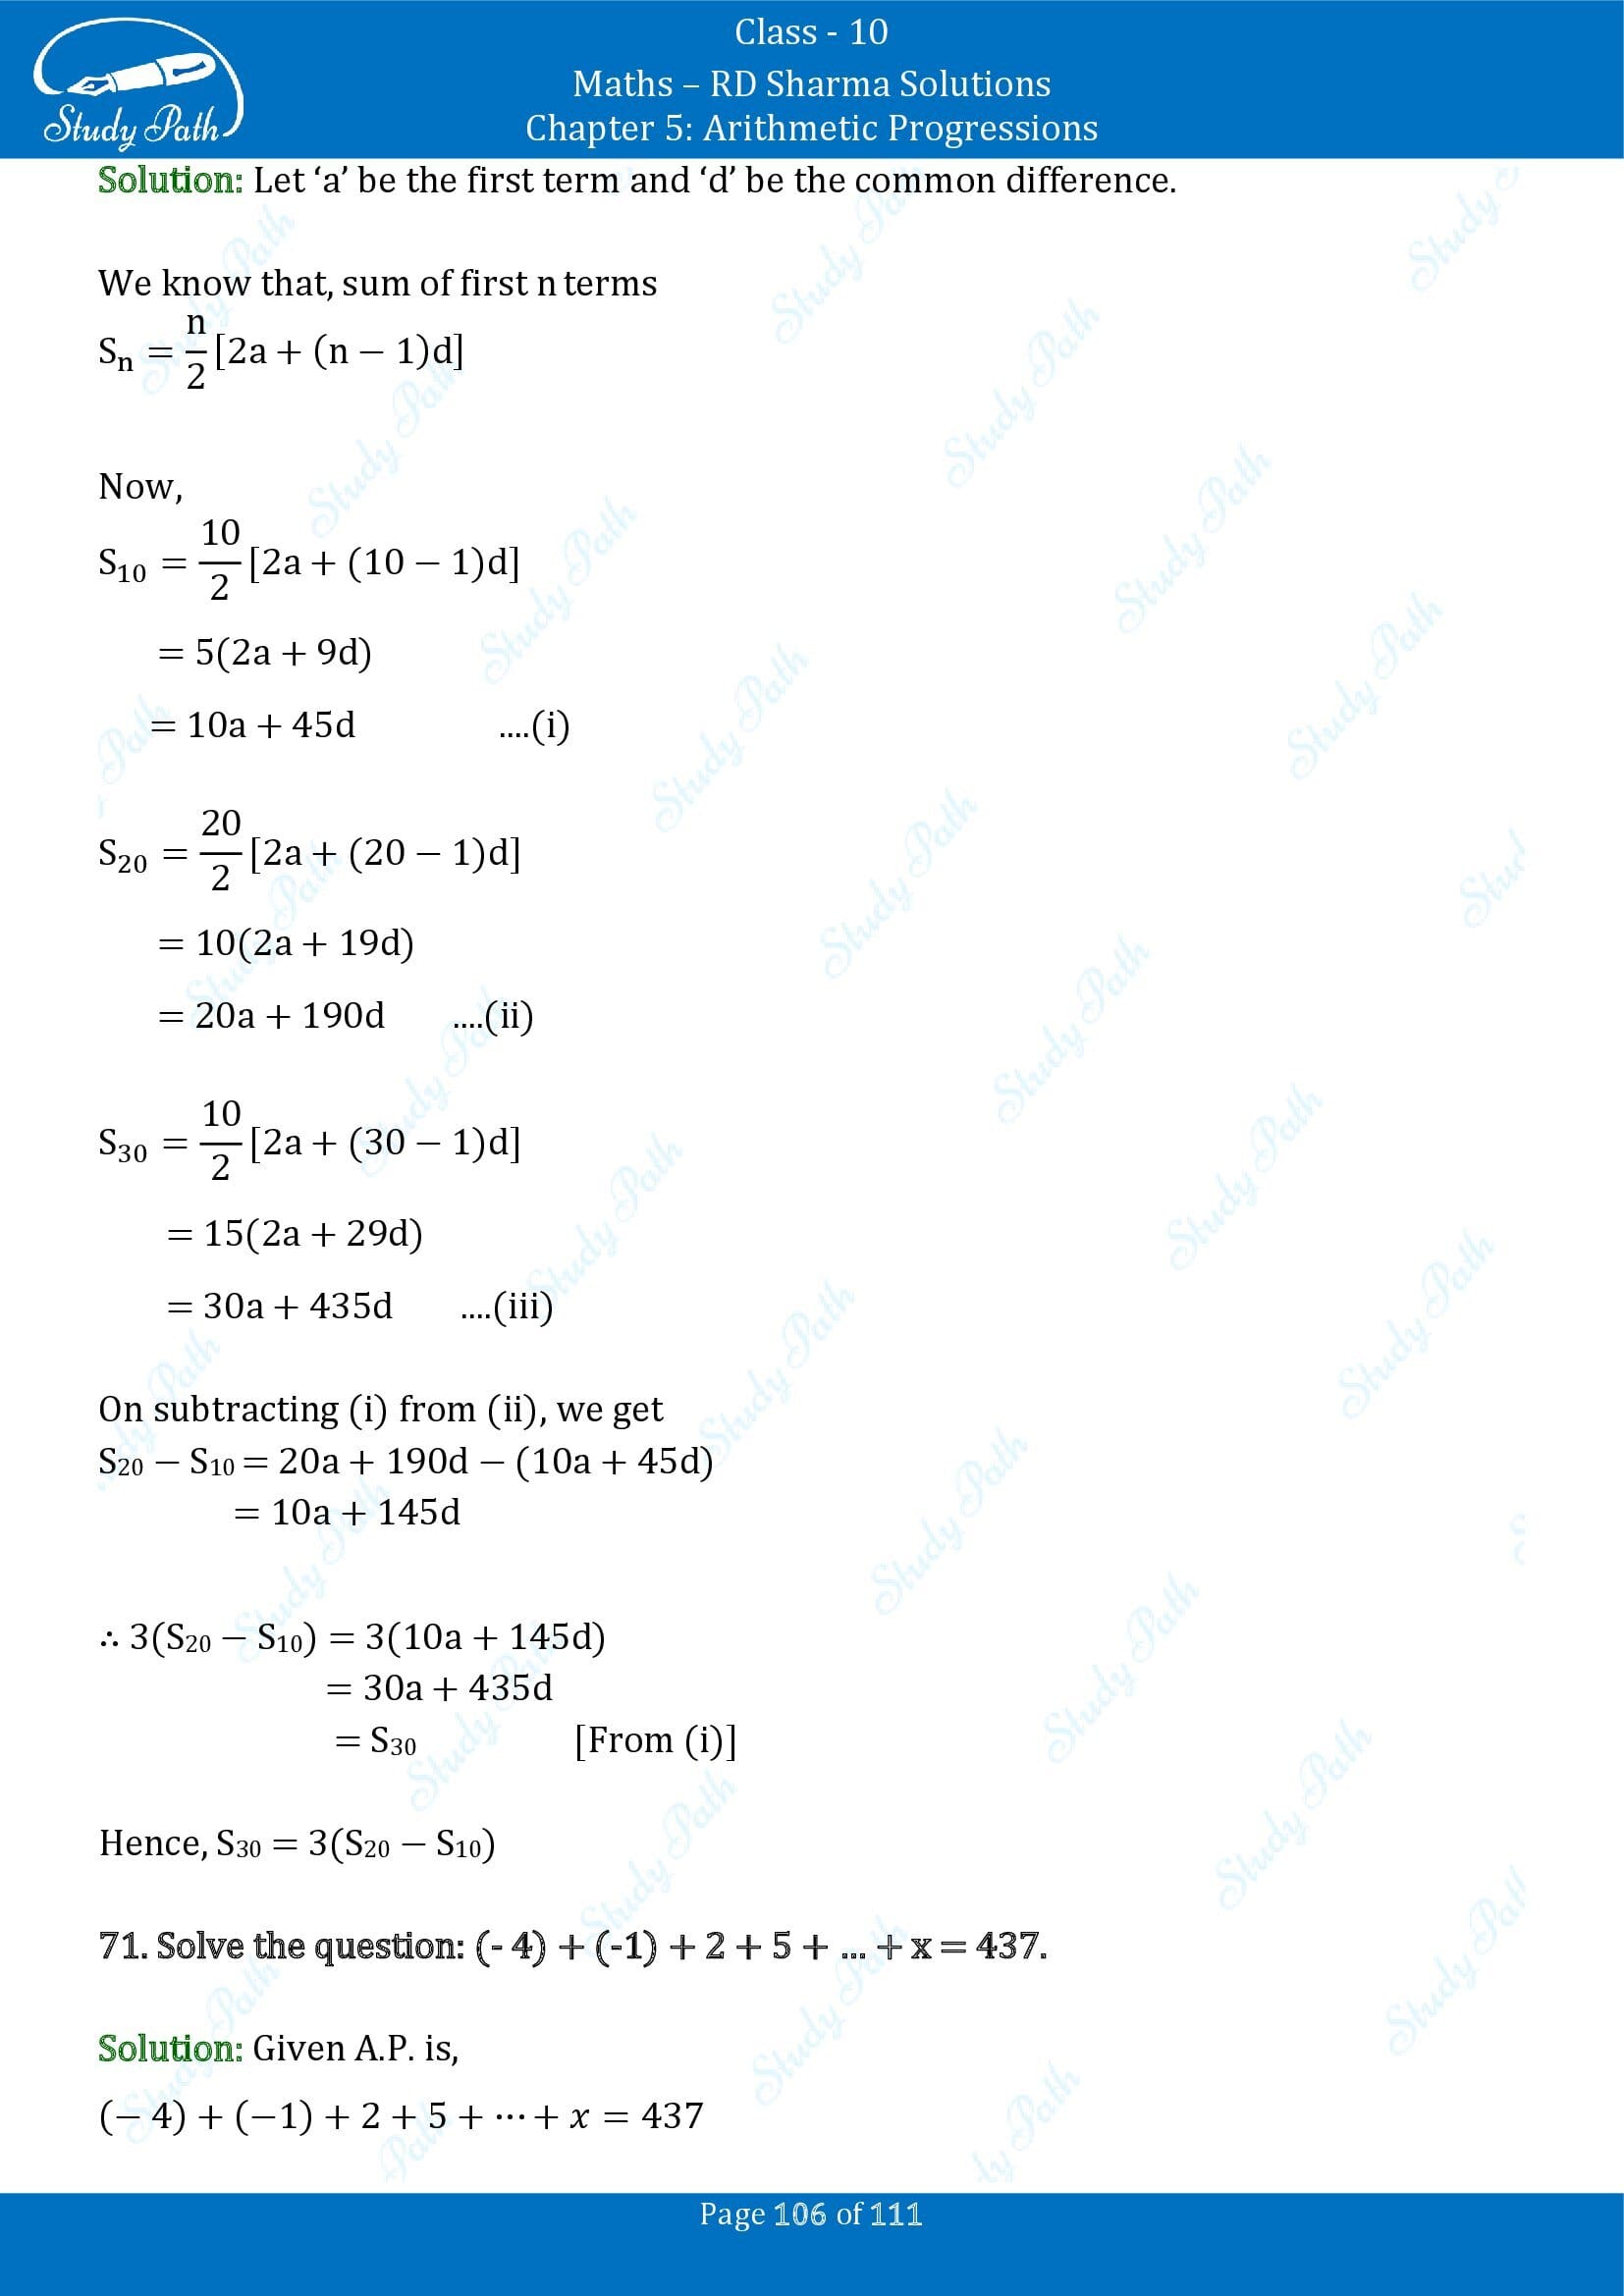 RD Sharma Solutions Class 10 Chapter 5 Arithmetic Progressions Exercise 5.6 00106